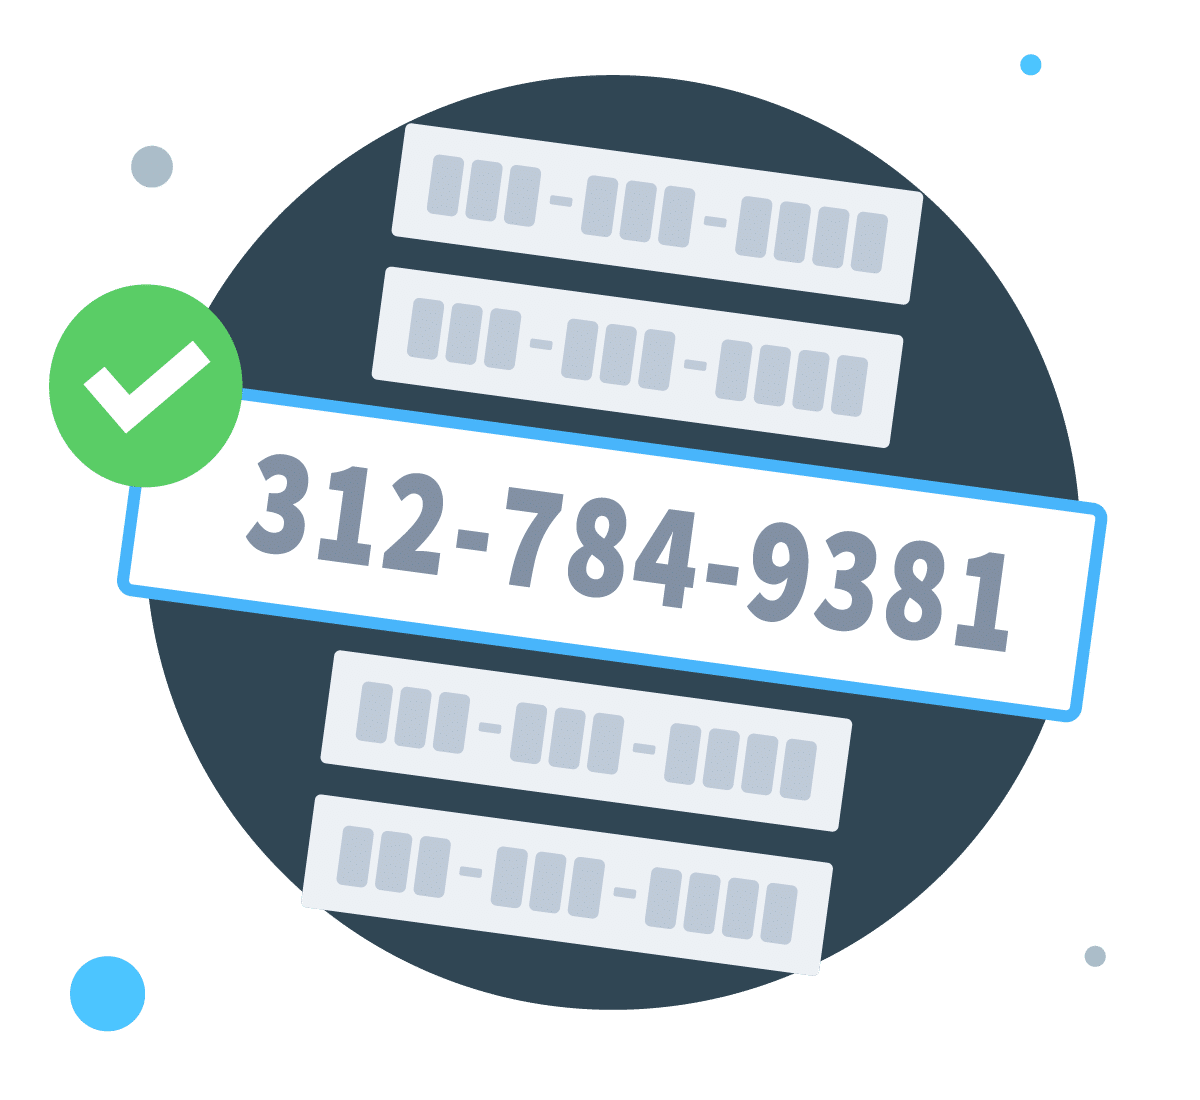 Cheapest Virtual Business Phone Number Service